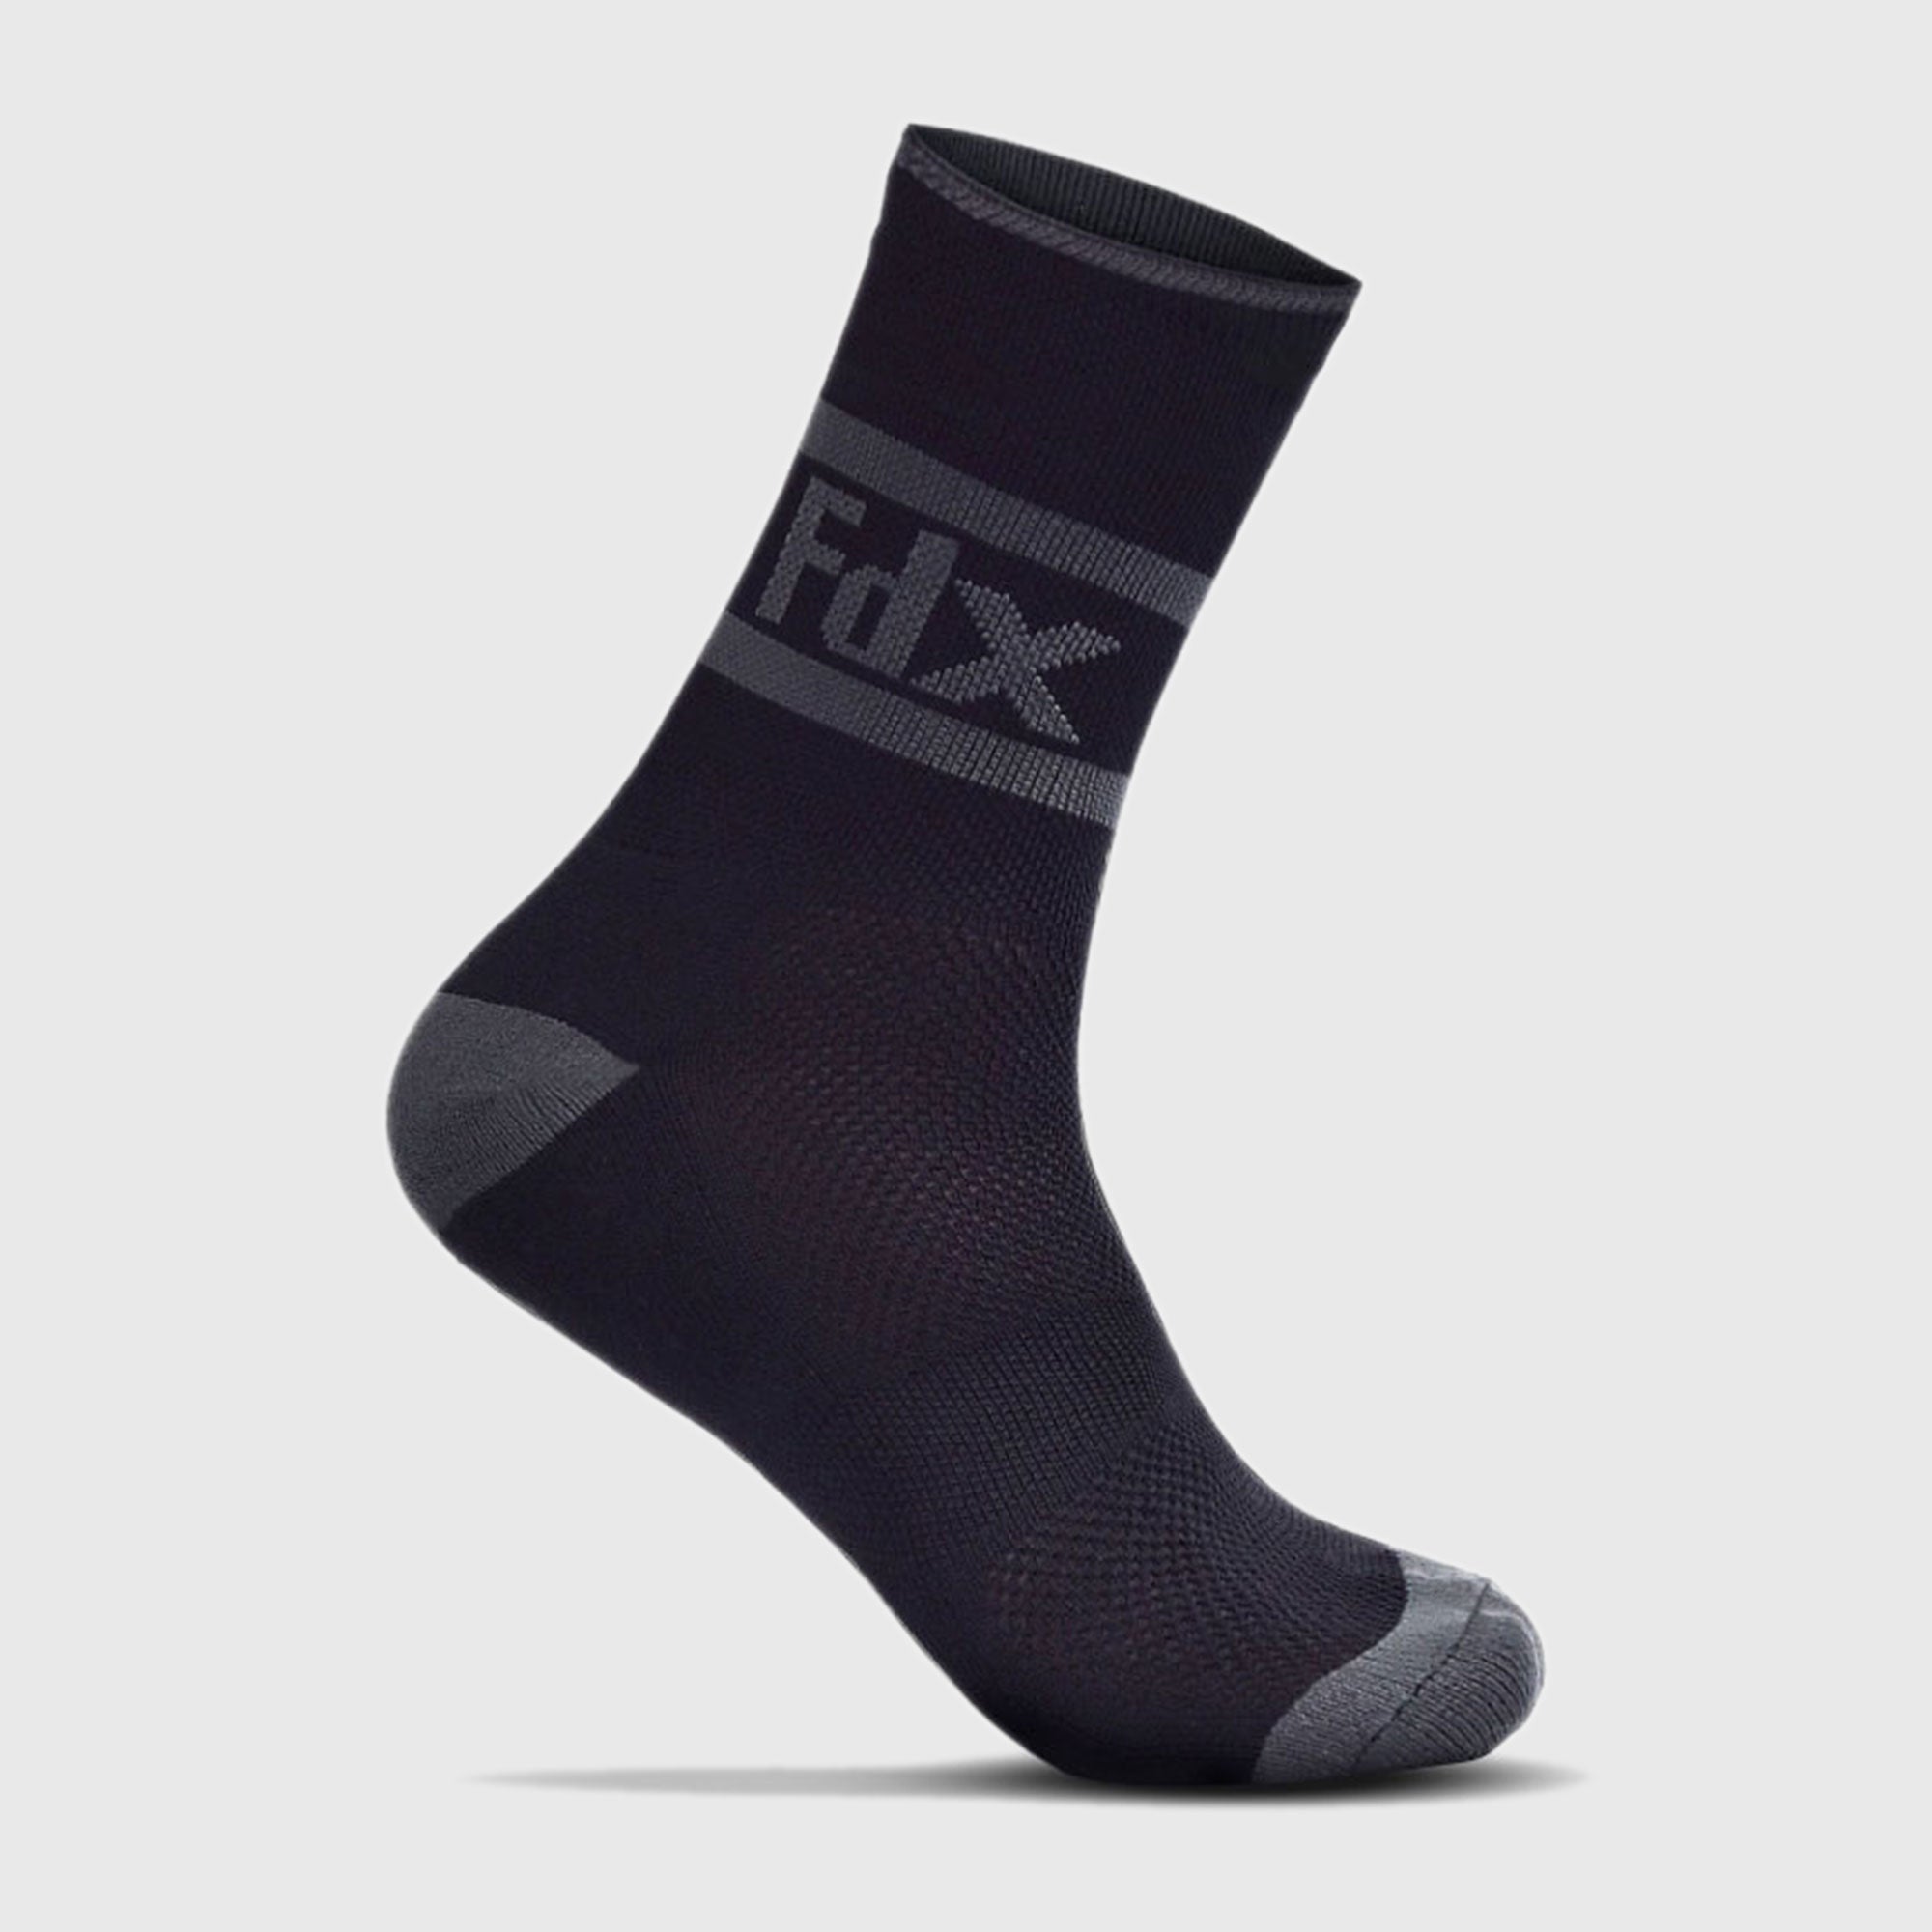 FDX Black Compression Socks Cycling - Breathable Seamless Toe Seams Athletic Sports Socks for Running, Walking, Work, Hiking, and Flight Travel